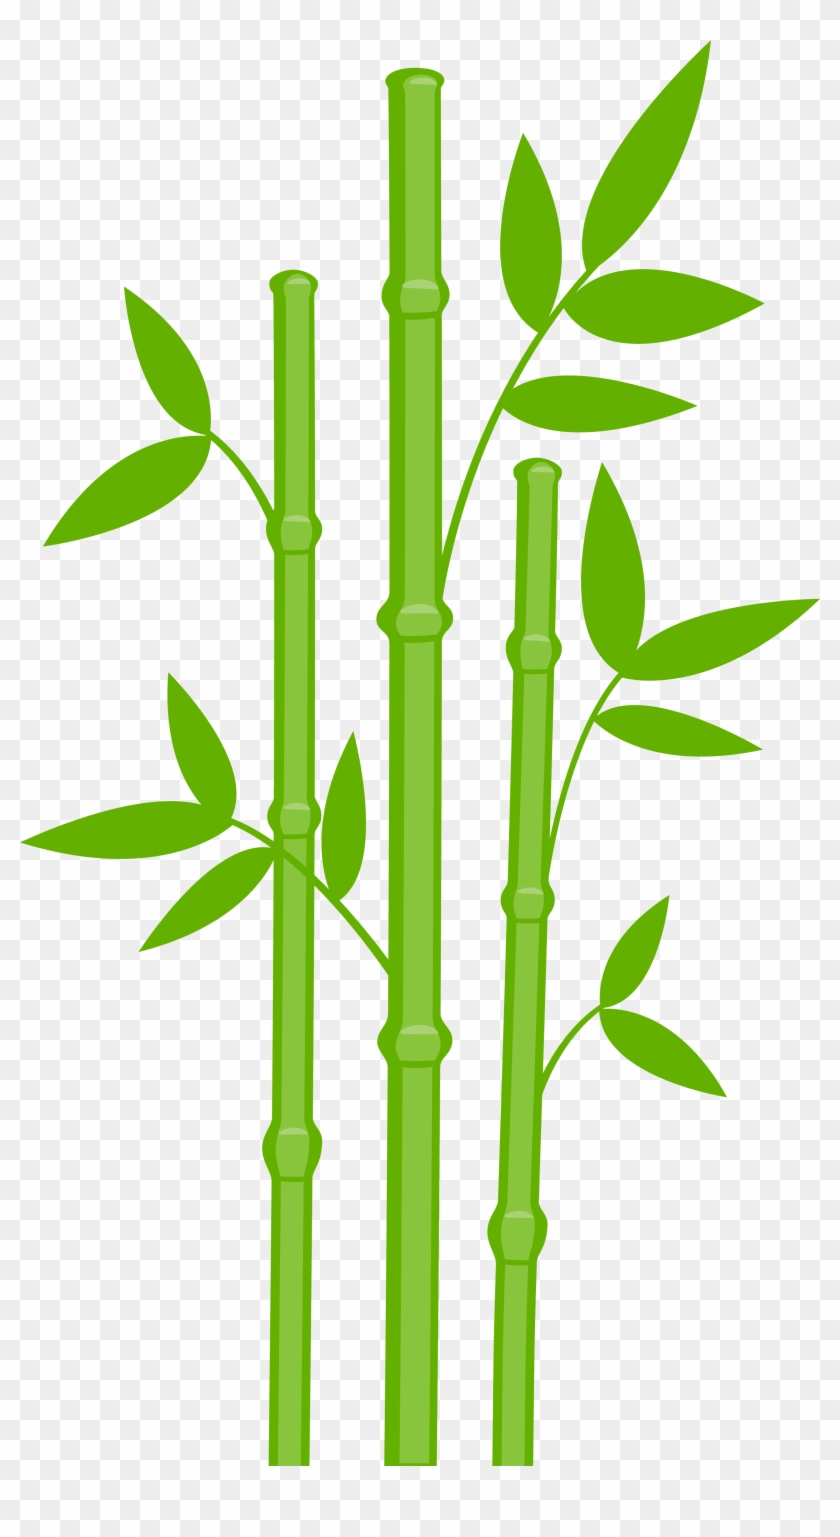 Bamboo Clipart Bamboo Leaves - Bamboo Transparent #1000492